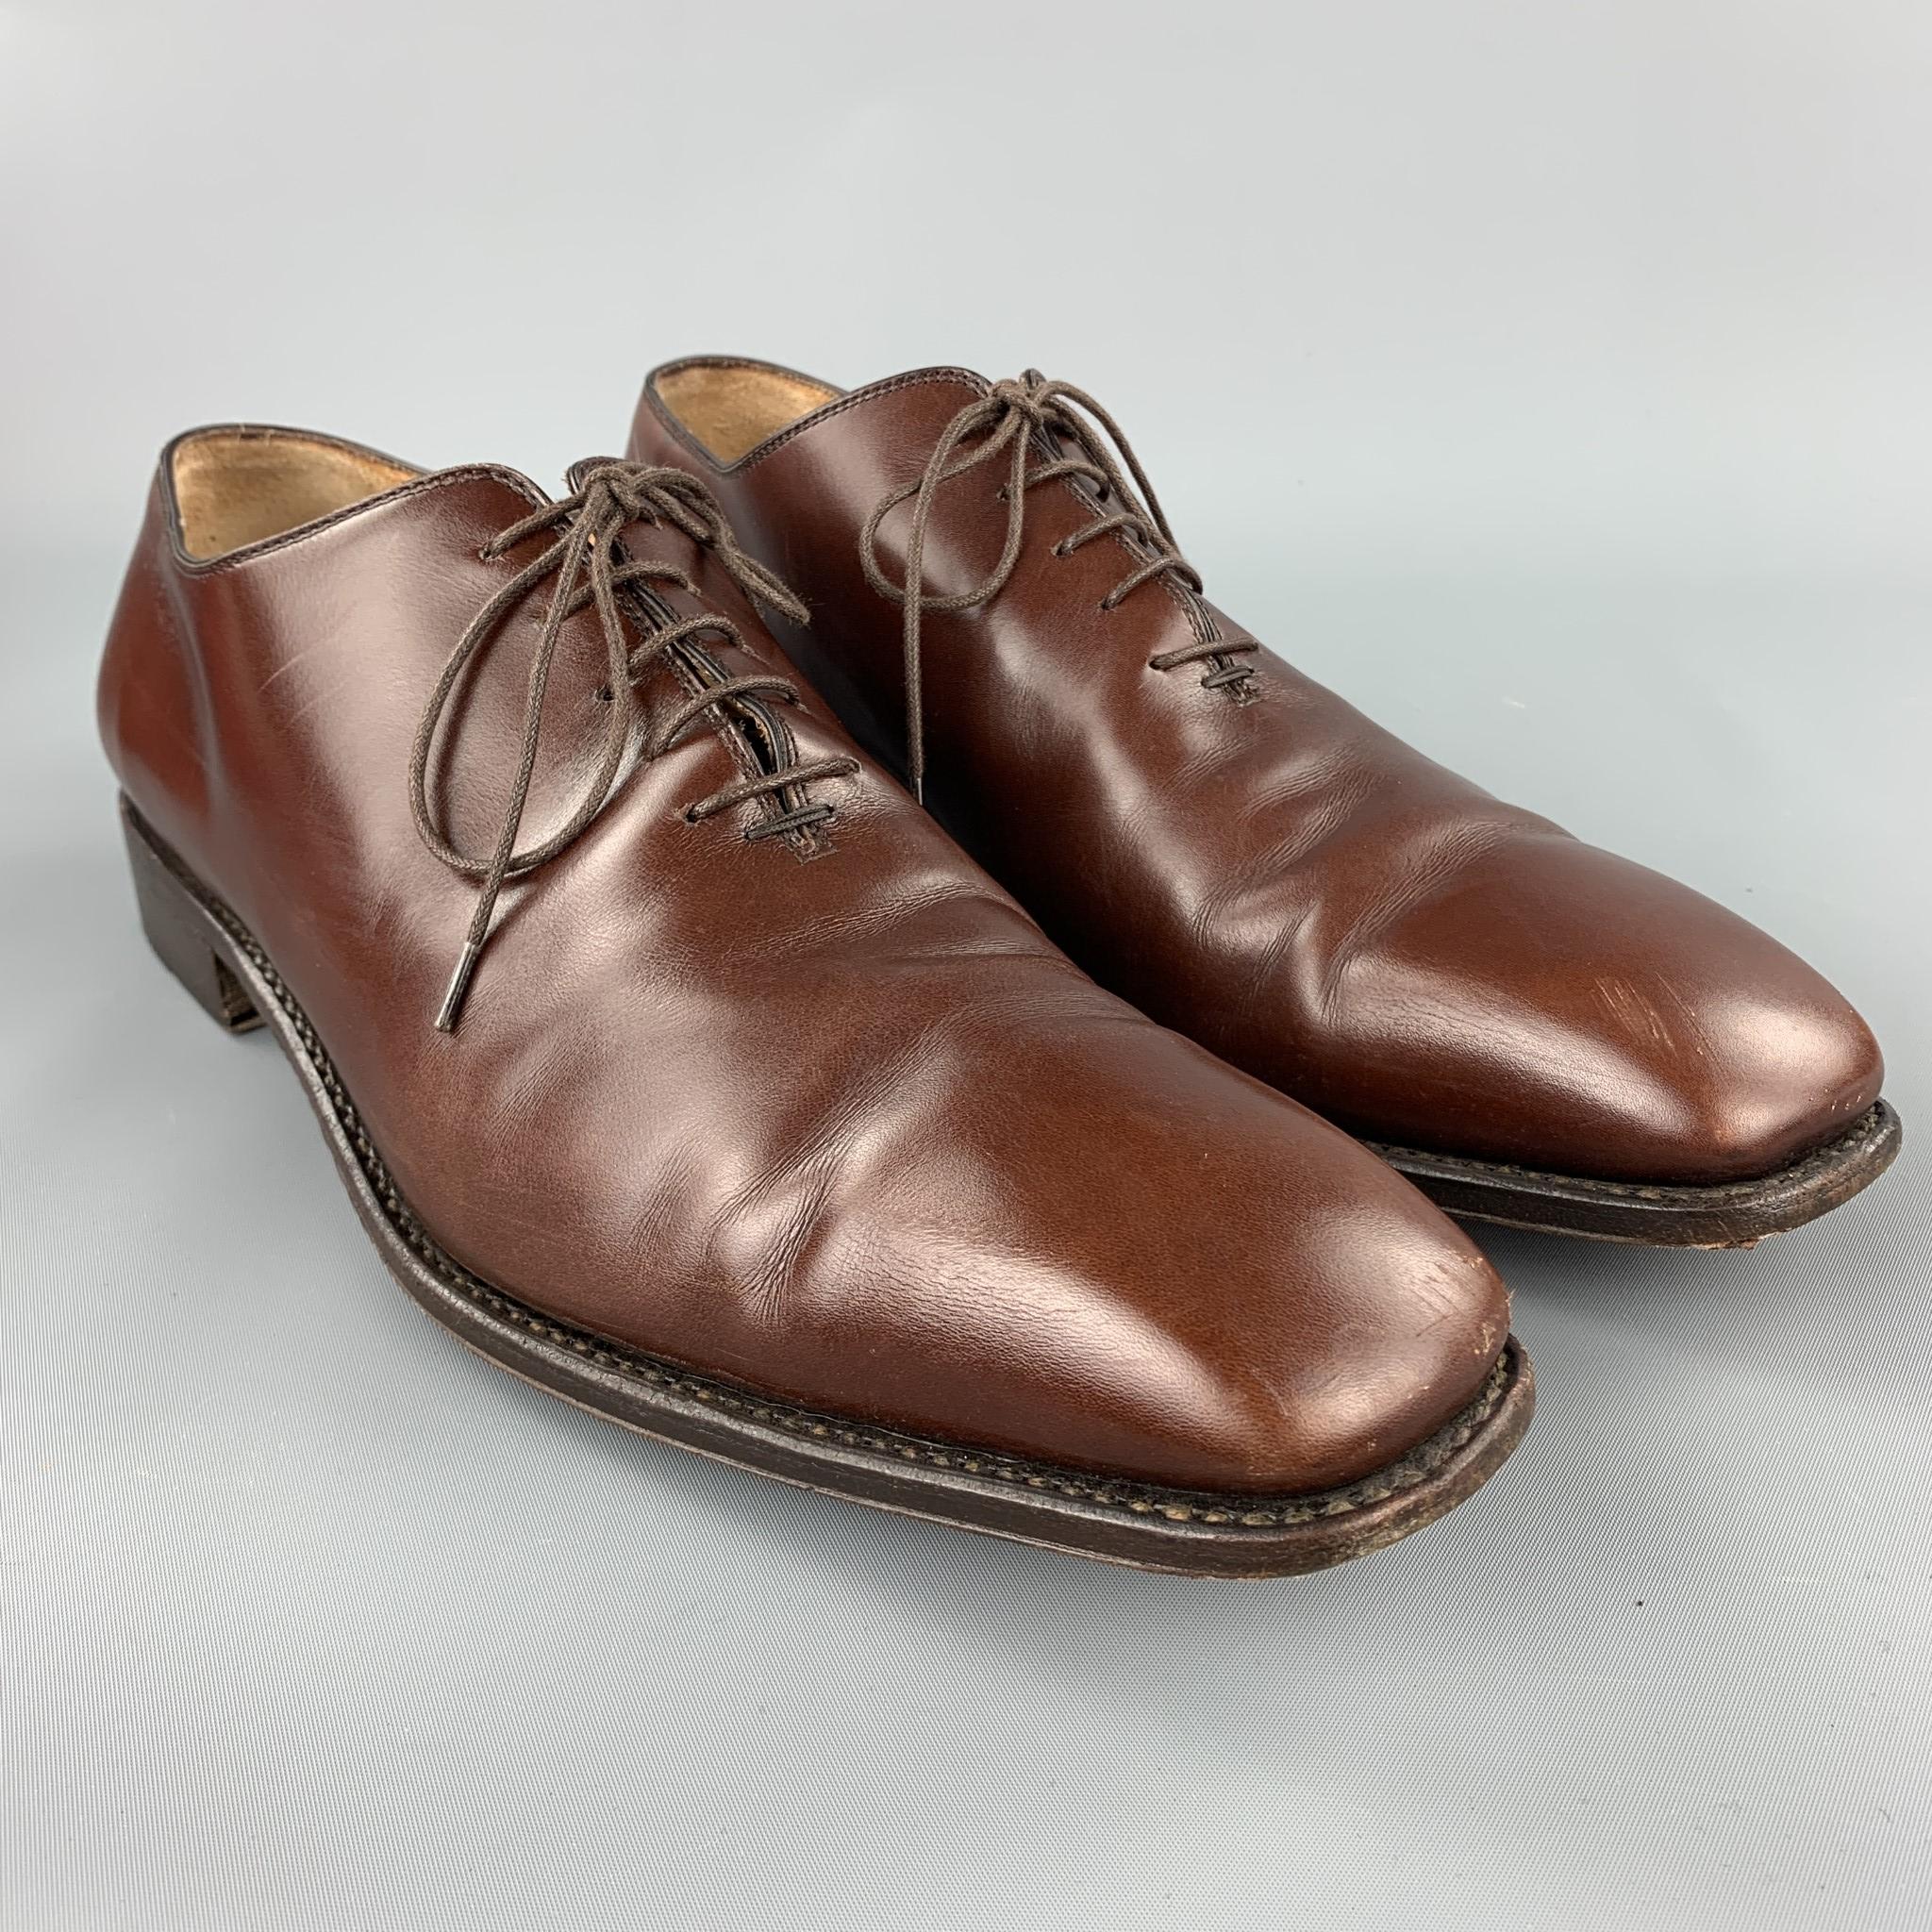 SALVATORE FERRAGAMO lace up shoes comes in a brown leather featuring a plain toe and a wooden sole. As-Is. Comes with box. Made in Italy.

Good Pre-Owned Condition.
Marked: 12 

Outsole:

13 in. x 4 in. 

SKU: 95726
Category: Lace Up Shoes

More